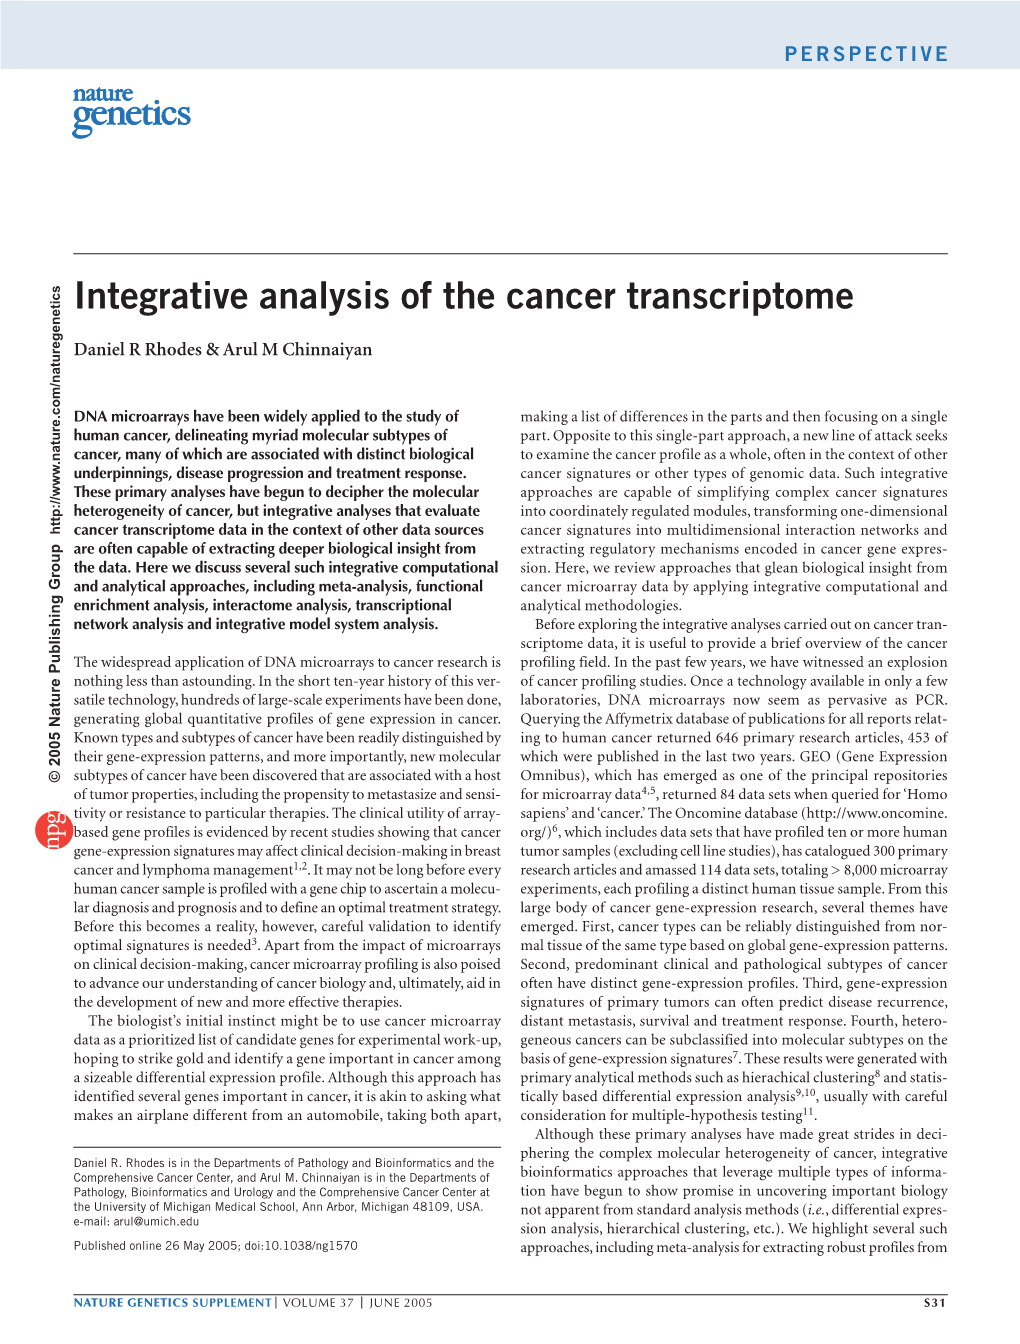 Integrative Analysis of the Cancer Transcriptome